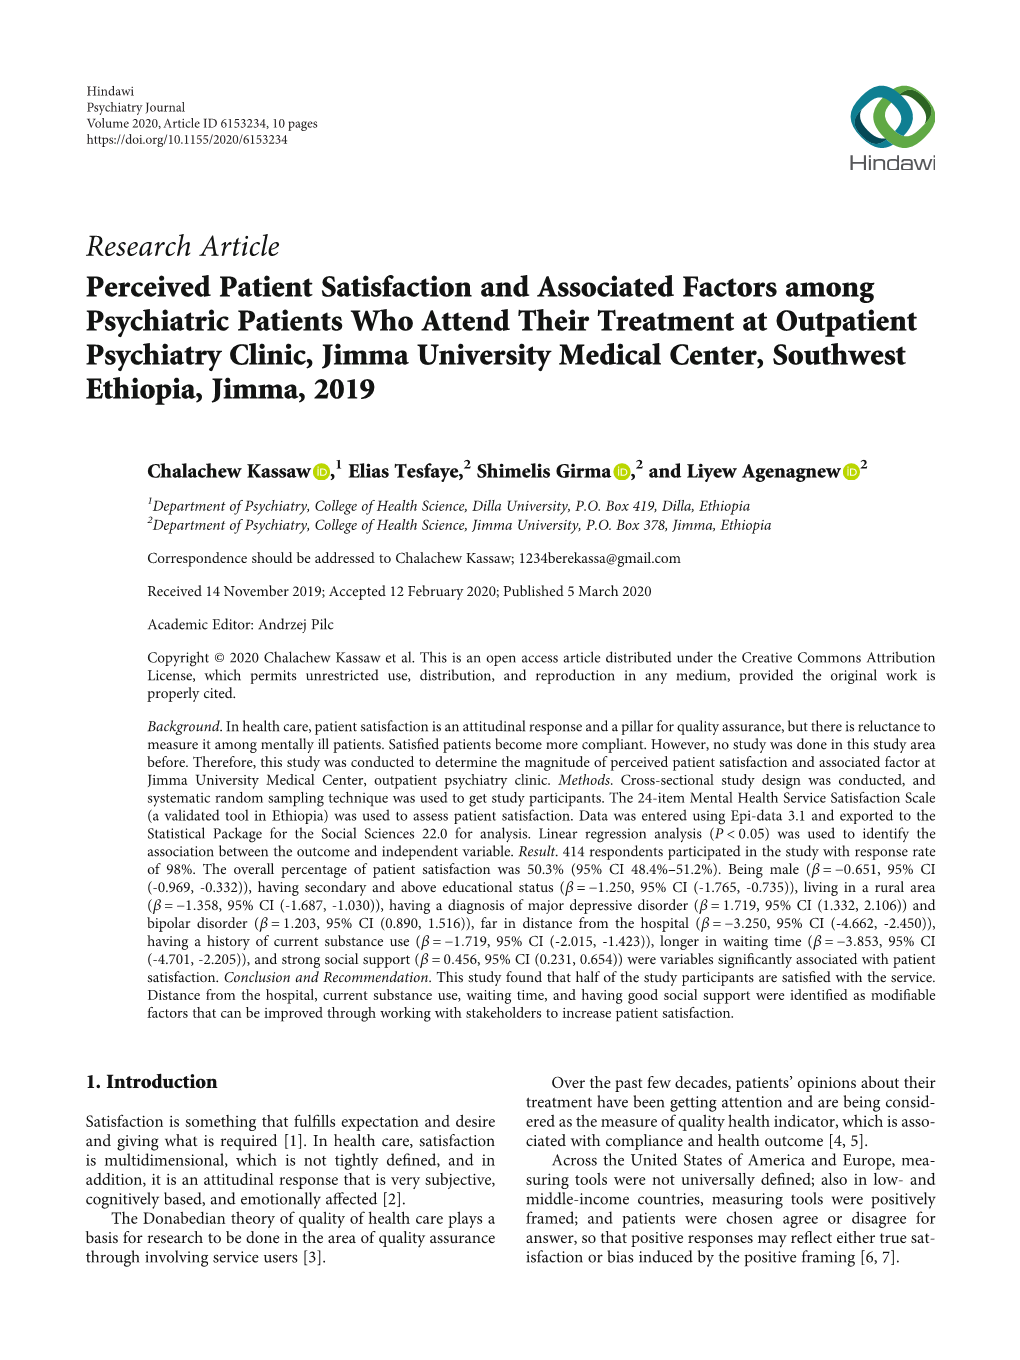 Perceived Patient Satisfaction and Associated Factors Among